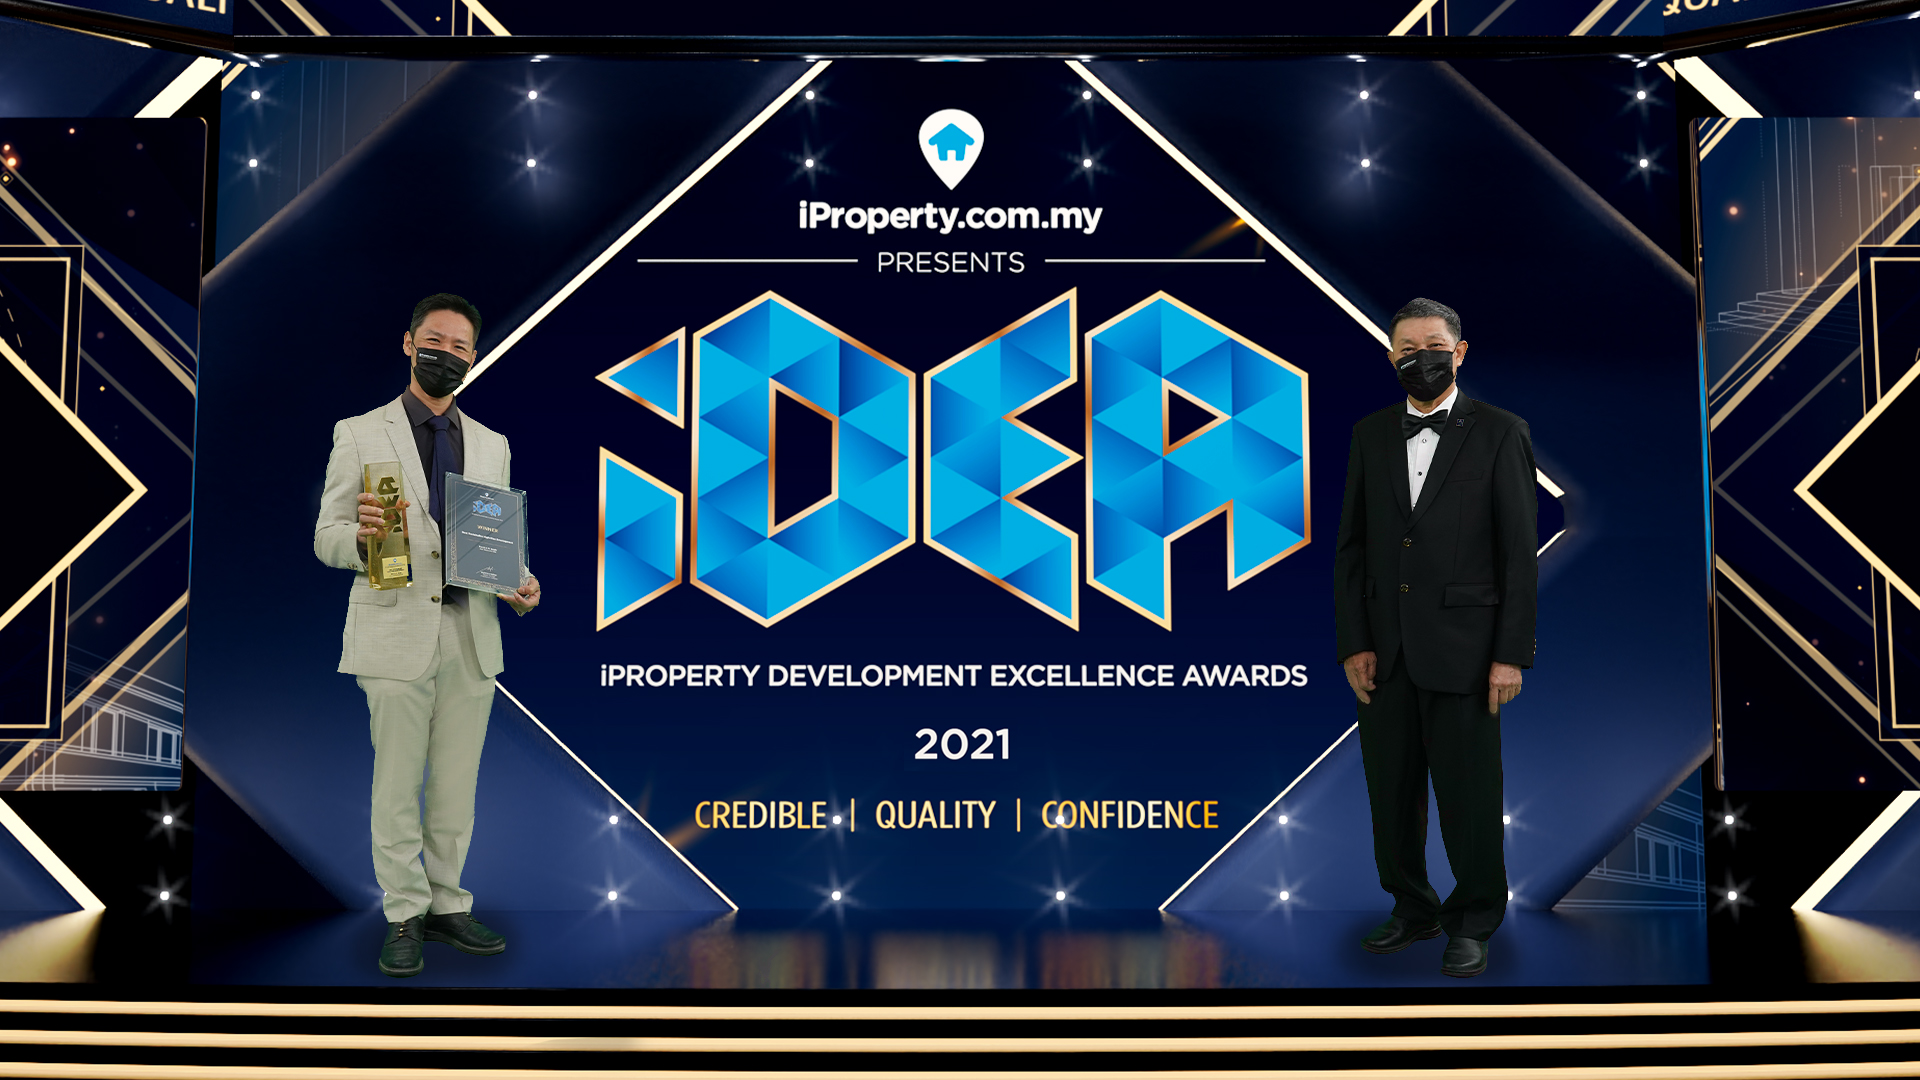 iProperty Development Excellence Awards 2021 Virtual Ceremony